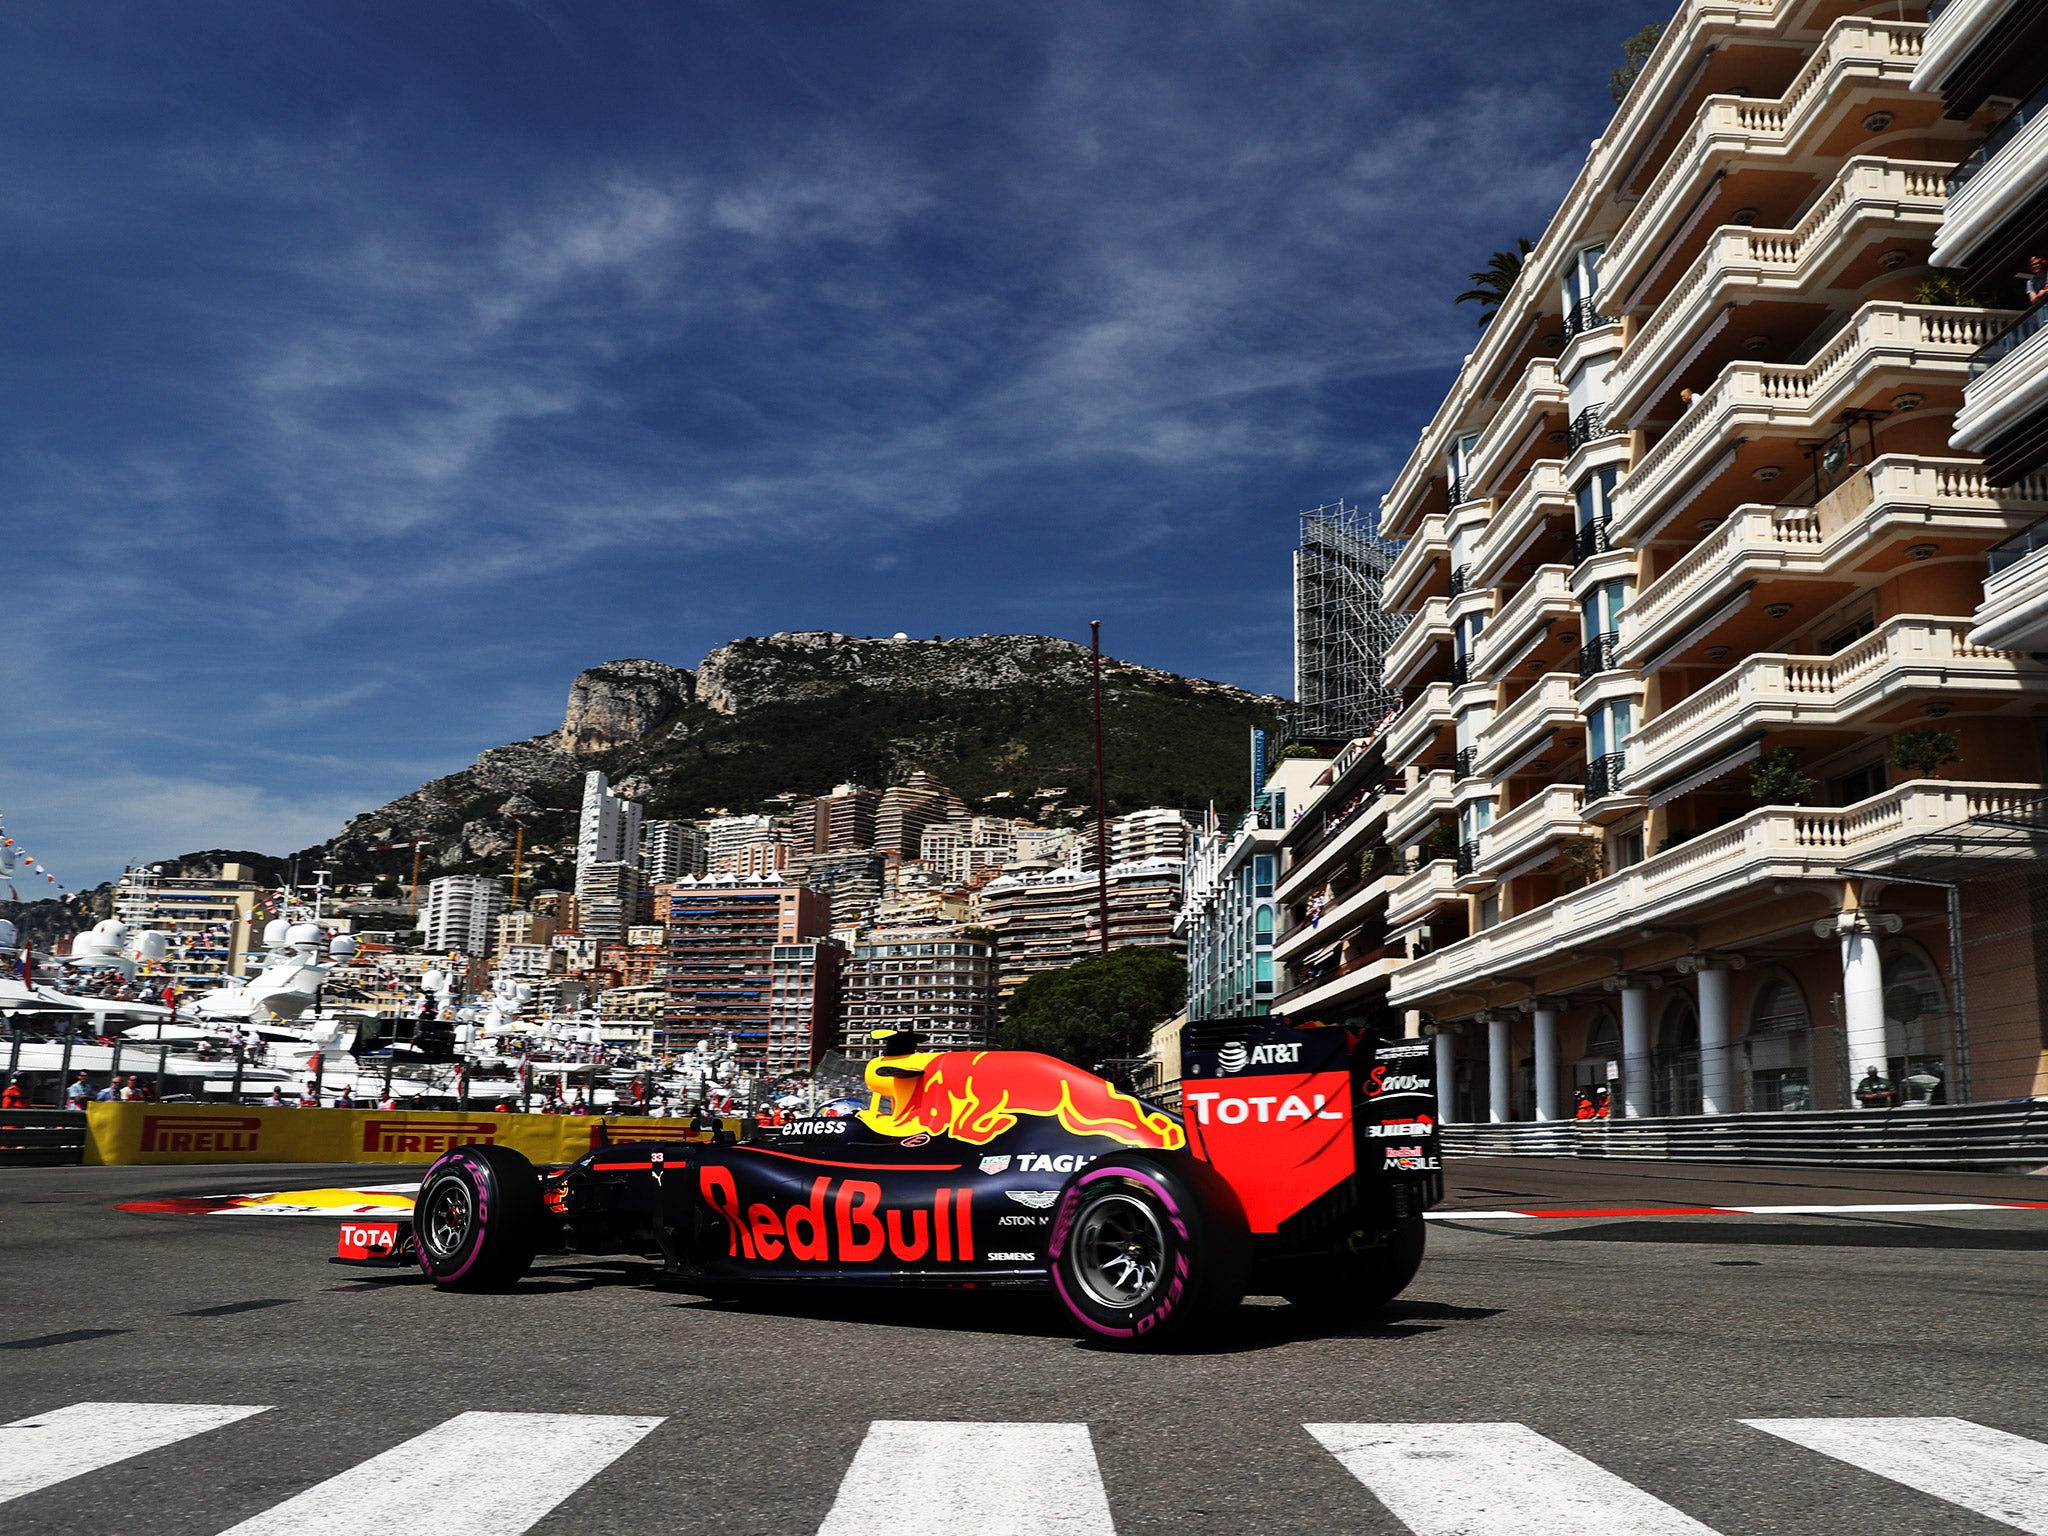 Red Bull have agreed a new deal with Renault for the supply of their engines